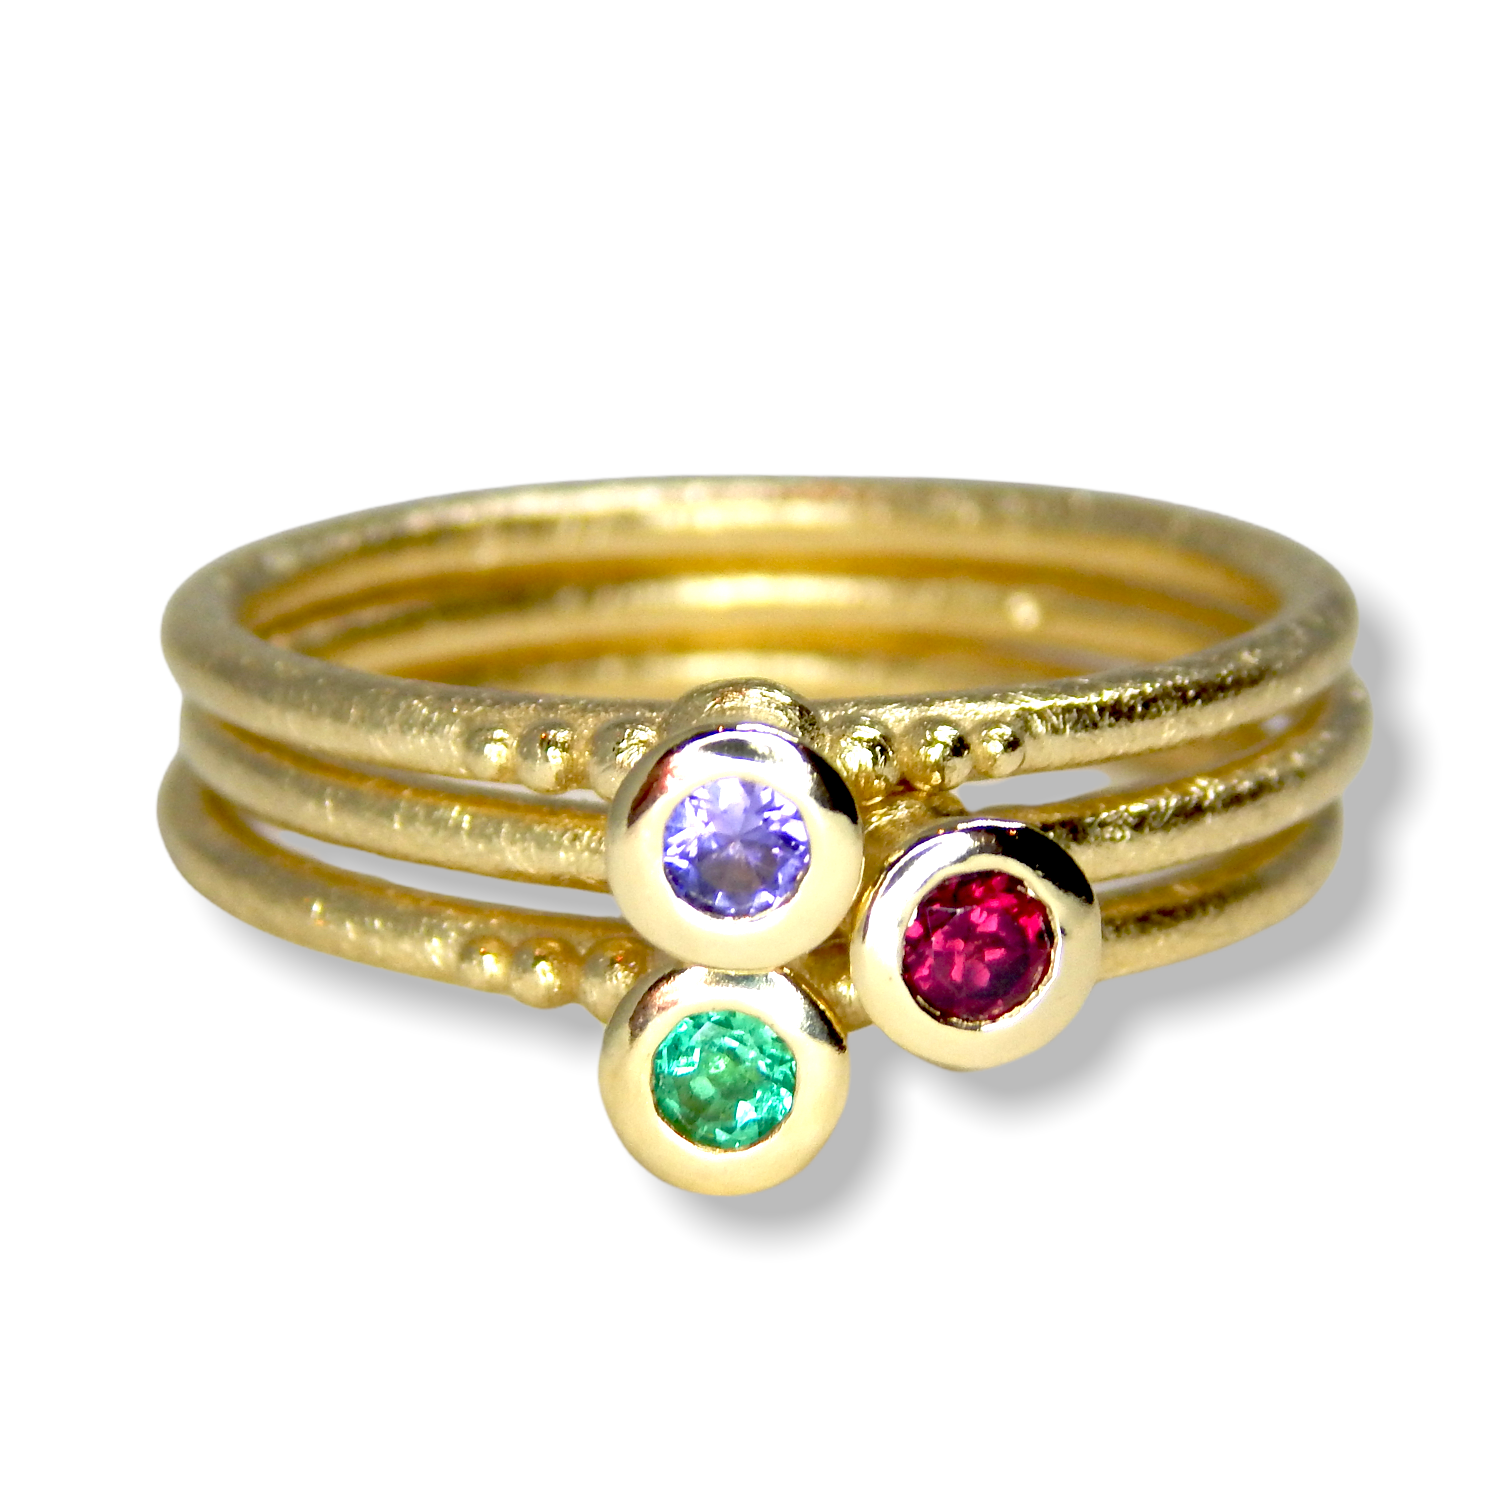 Victoria's Custom Bespoke Victoria Stacker Ring Set  | In 9ct Yellow Gold | Set With An Emerald, Lilac Sapphire And Rhodolite Garnet